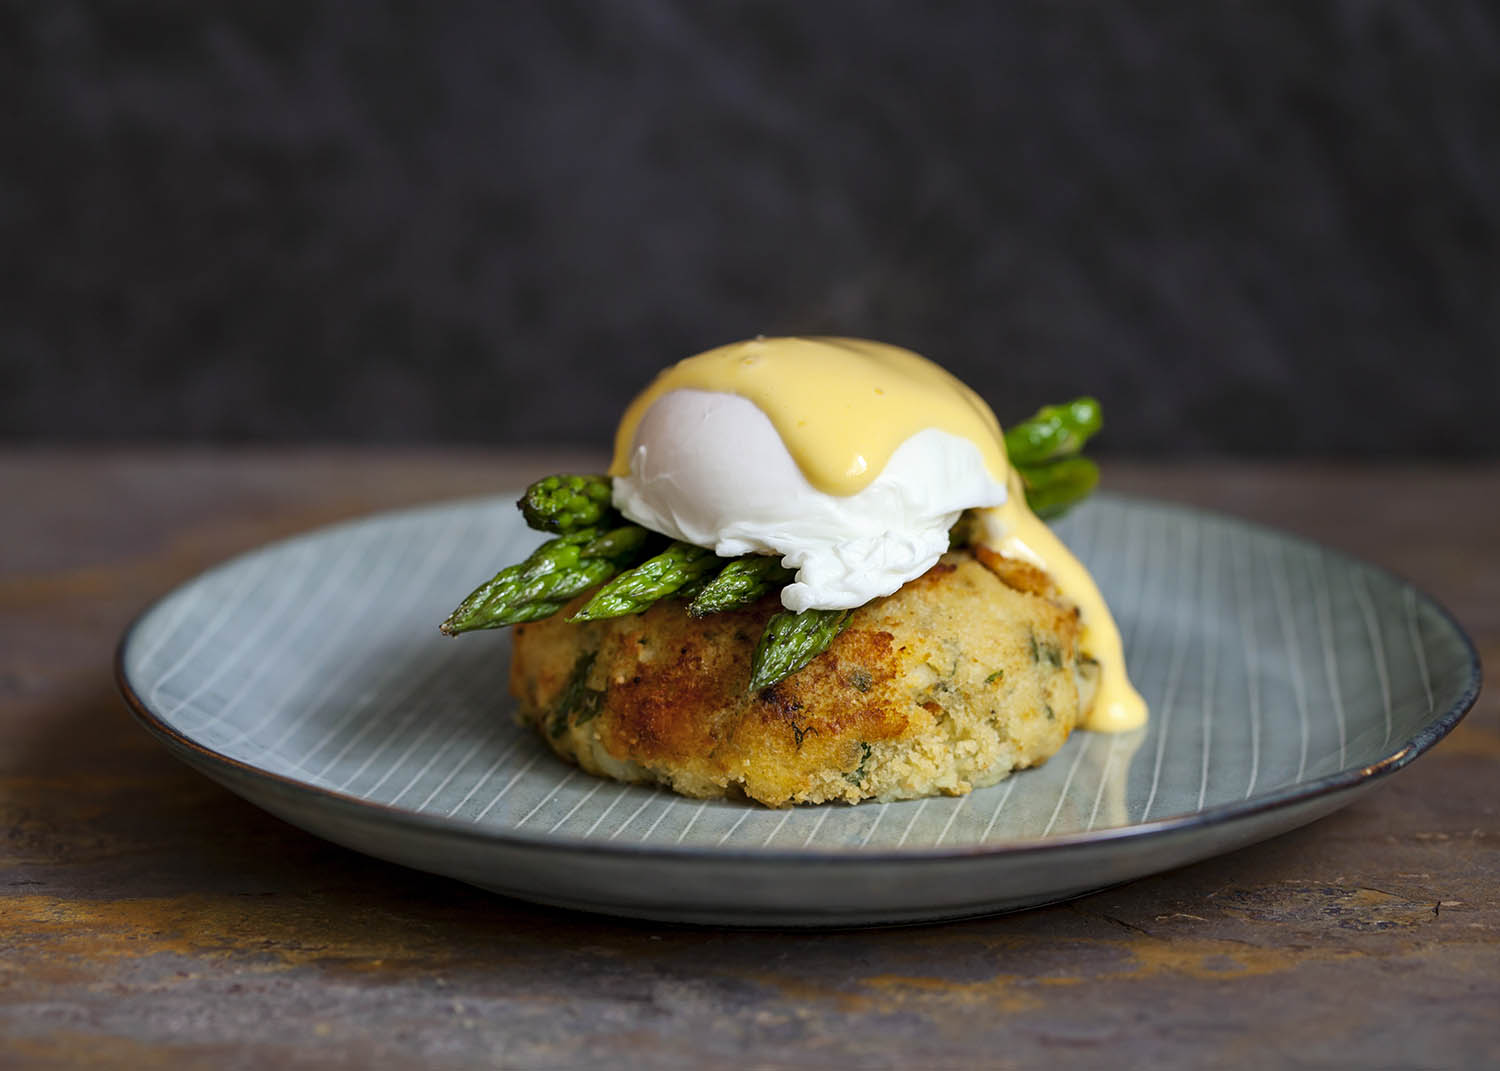 Fish cake with asparagus, poached egg and hollandaise sauce